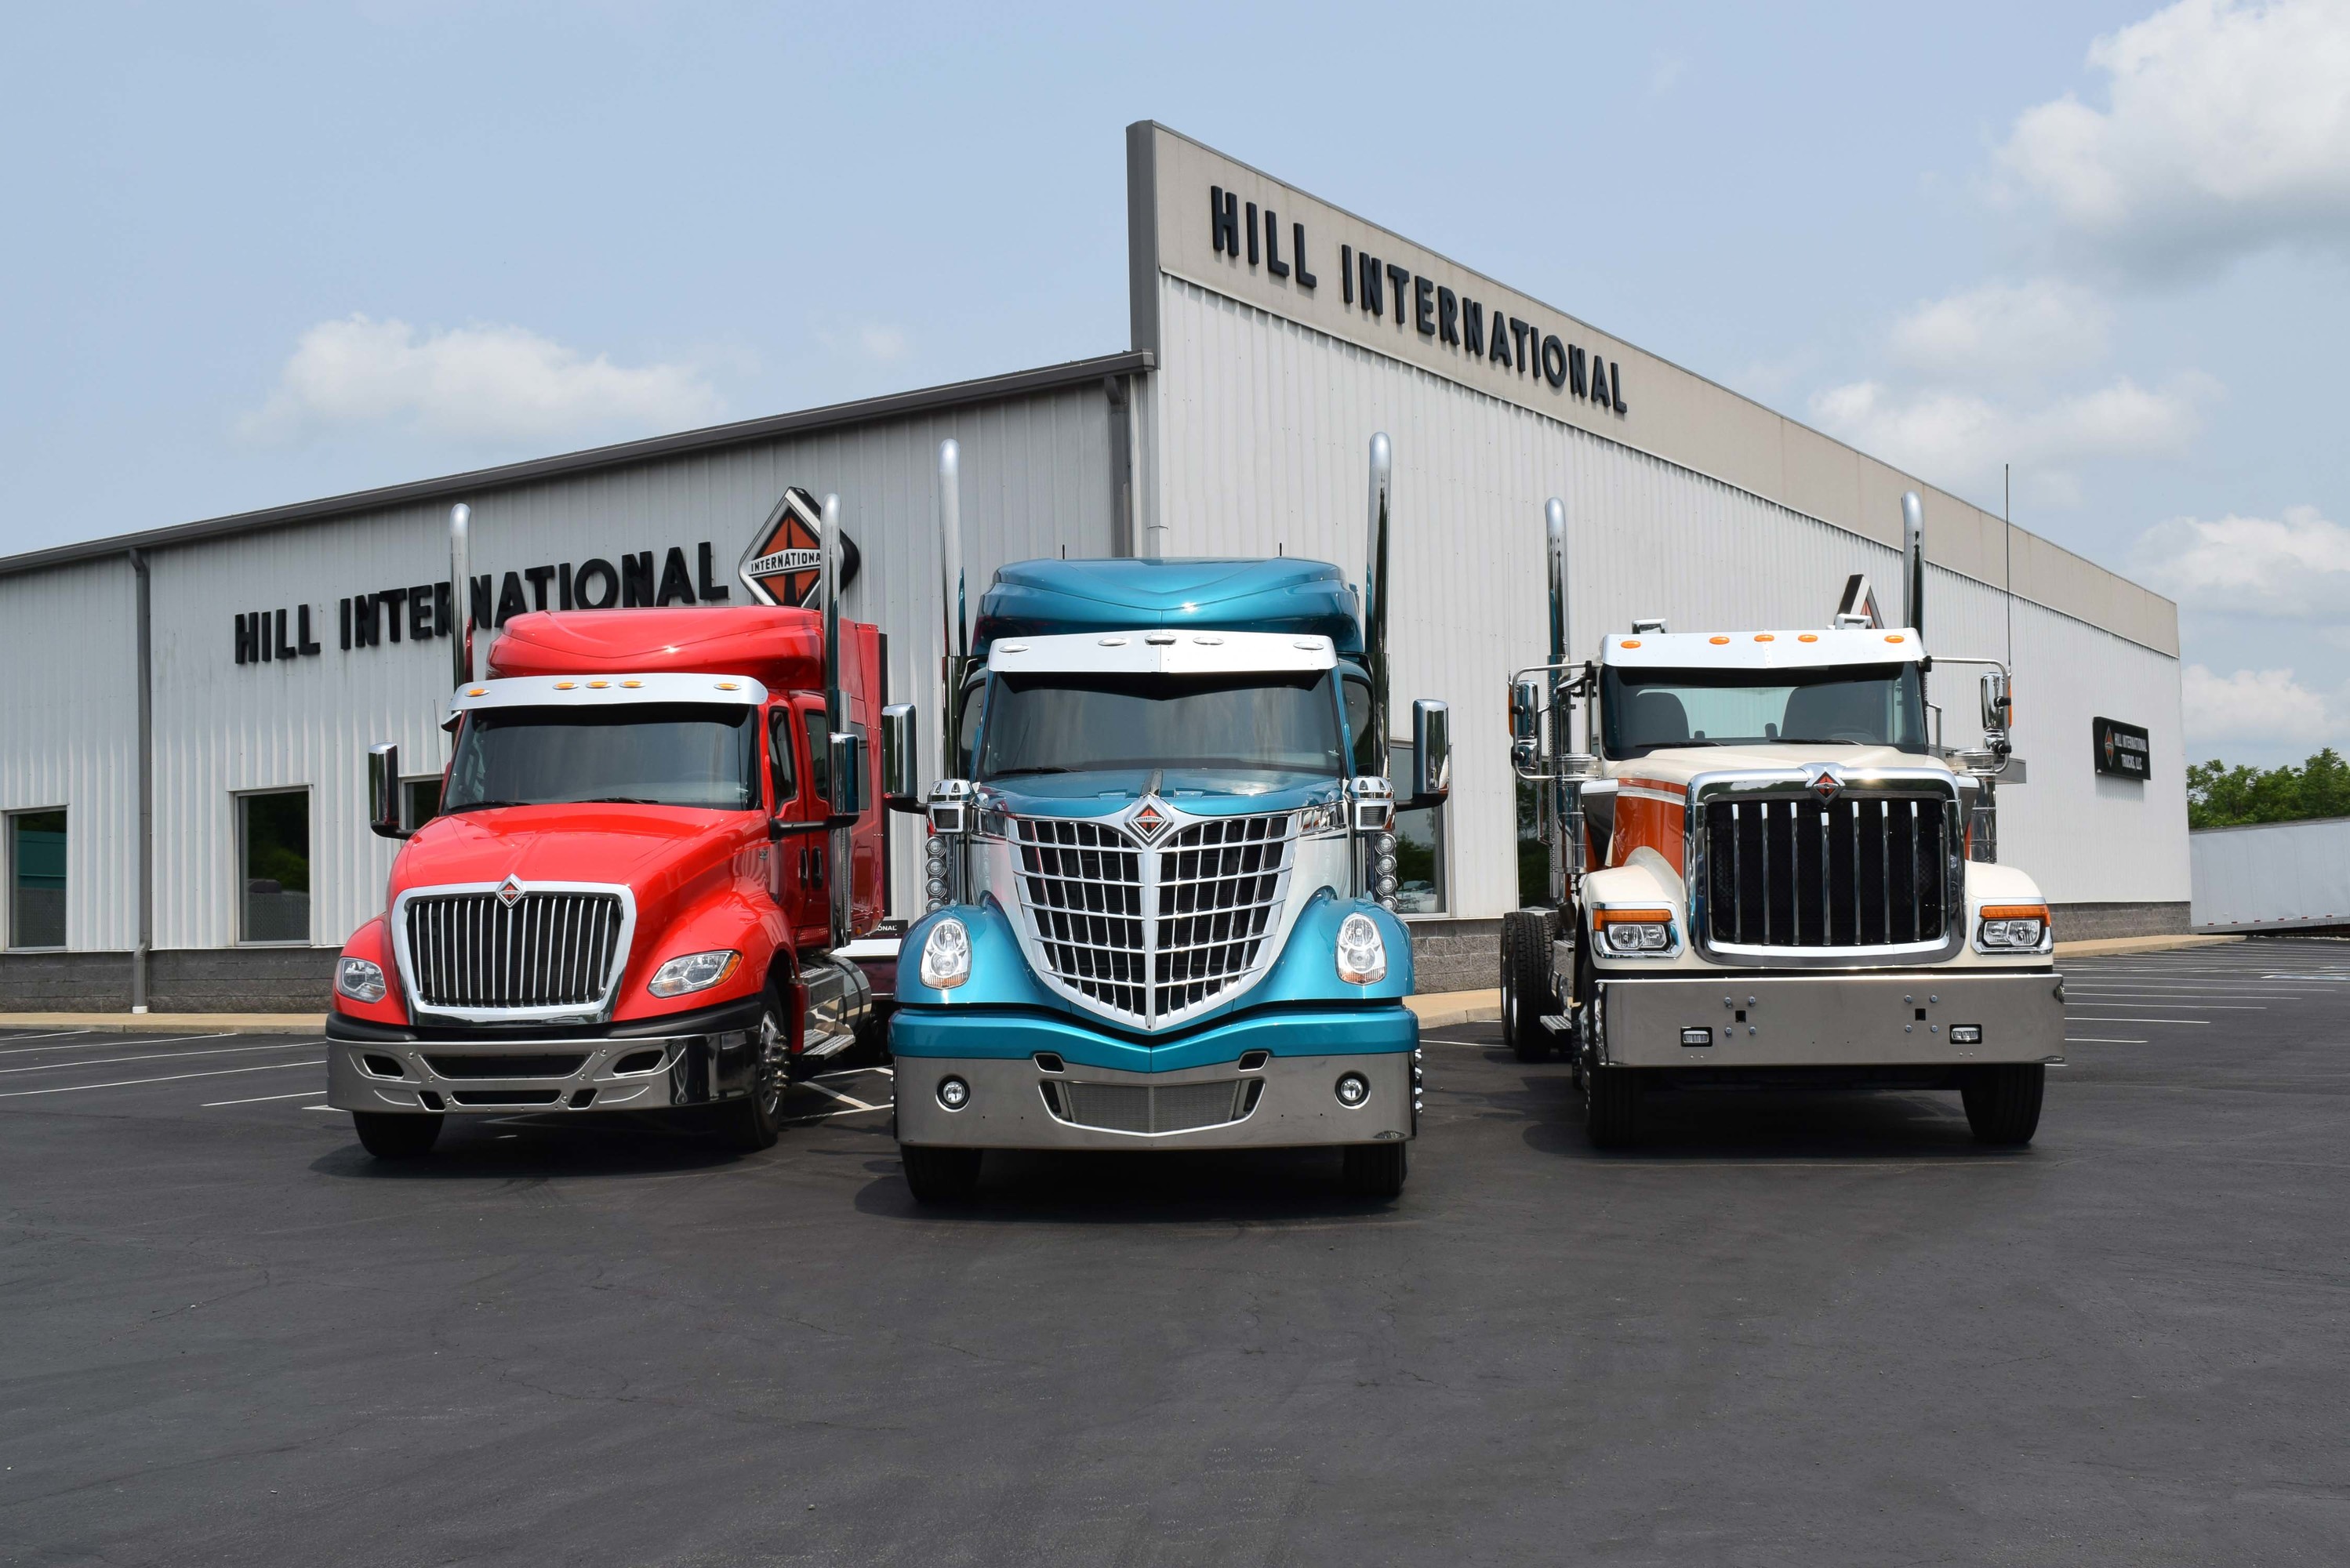 Three International® trucks parked in front of Hill International Trucks on a partly cloudy day.